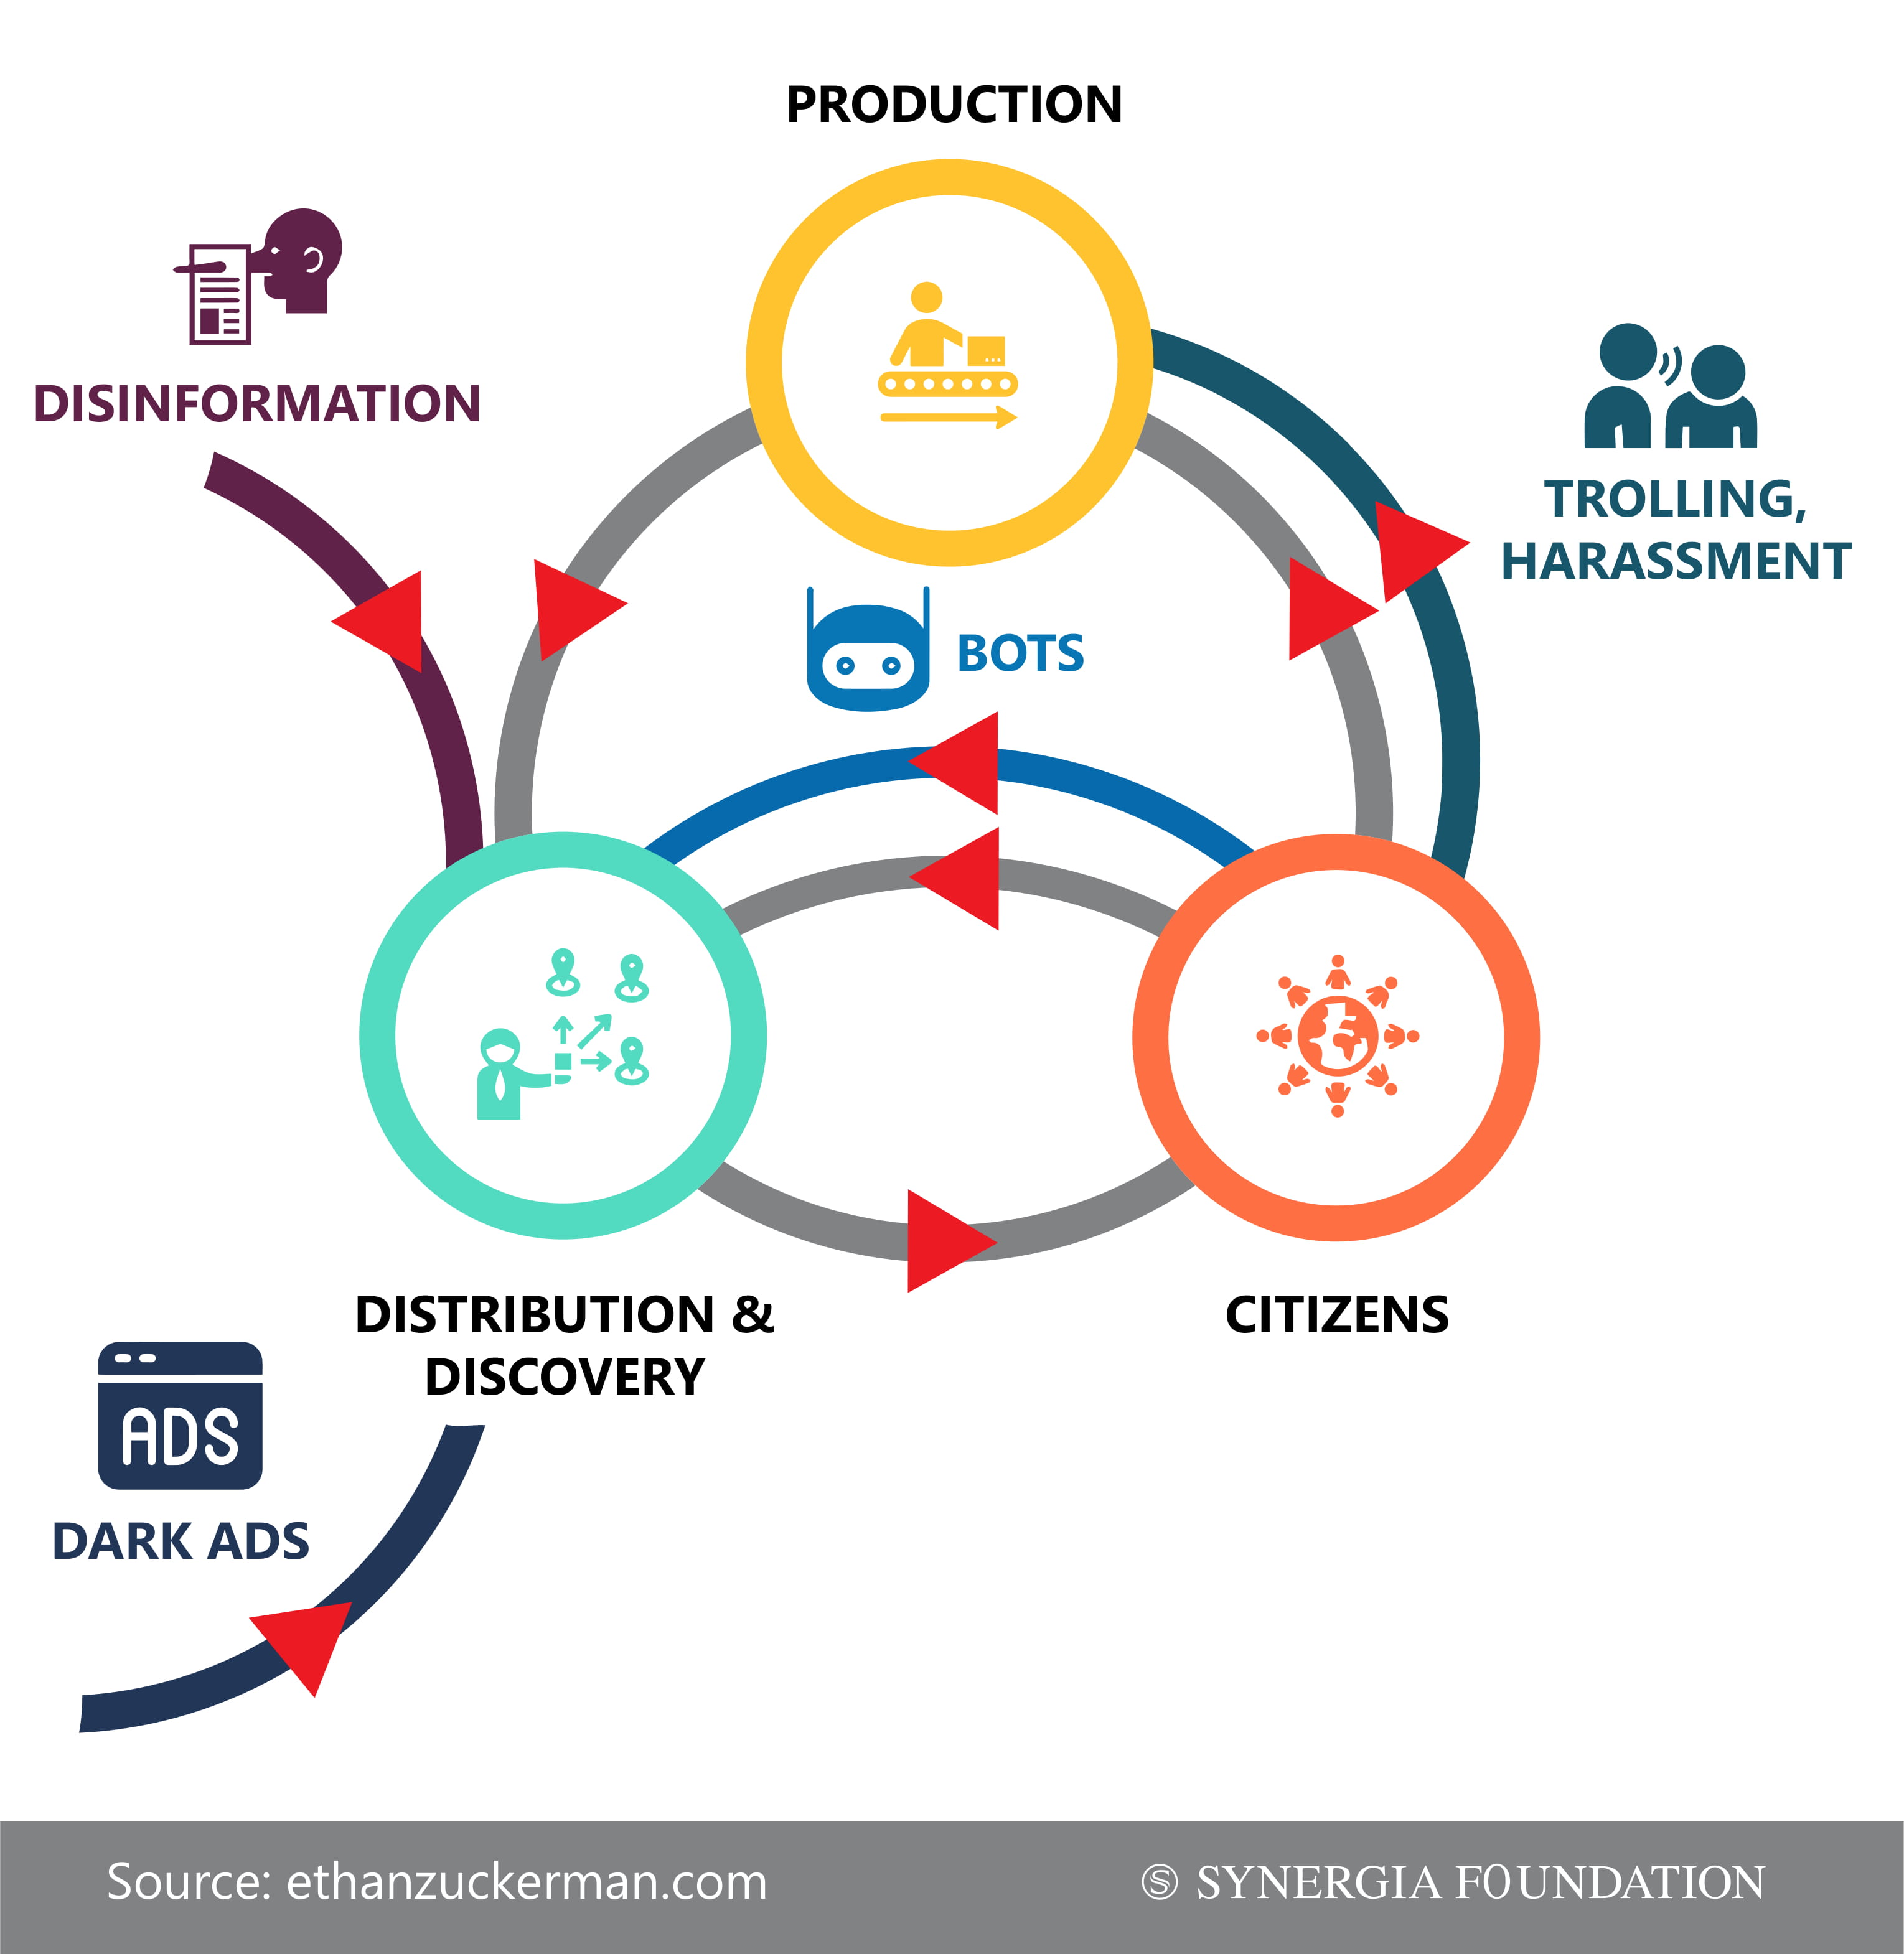 Role of citizens in the current media production model